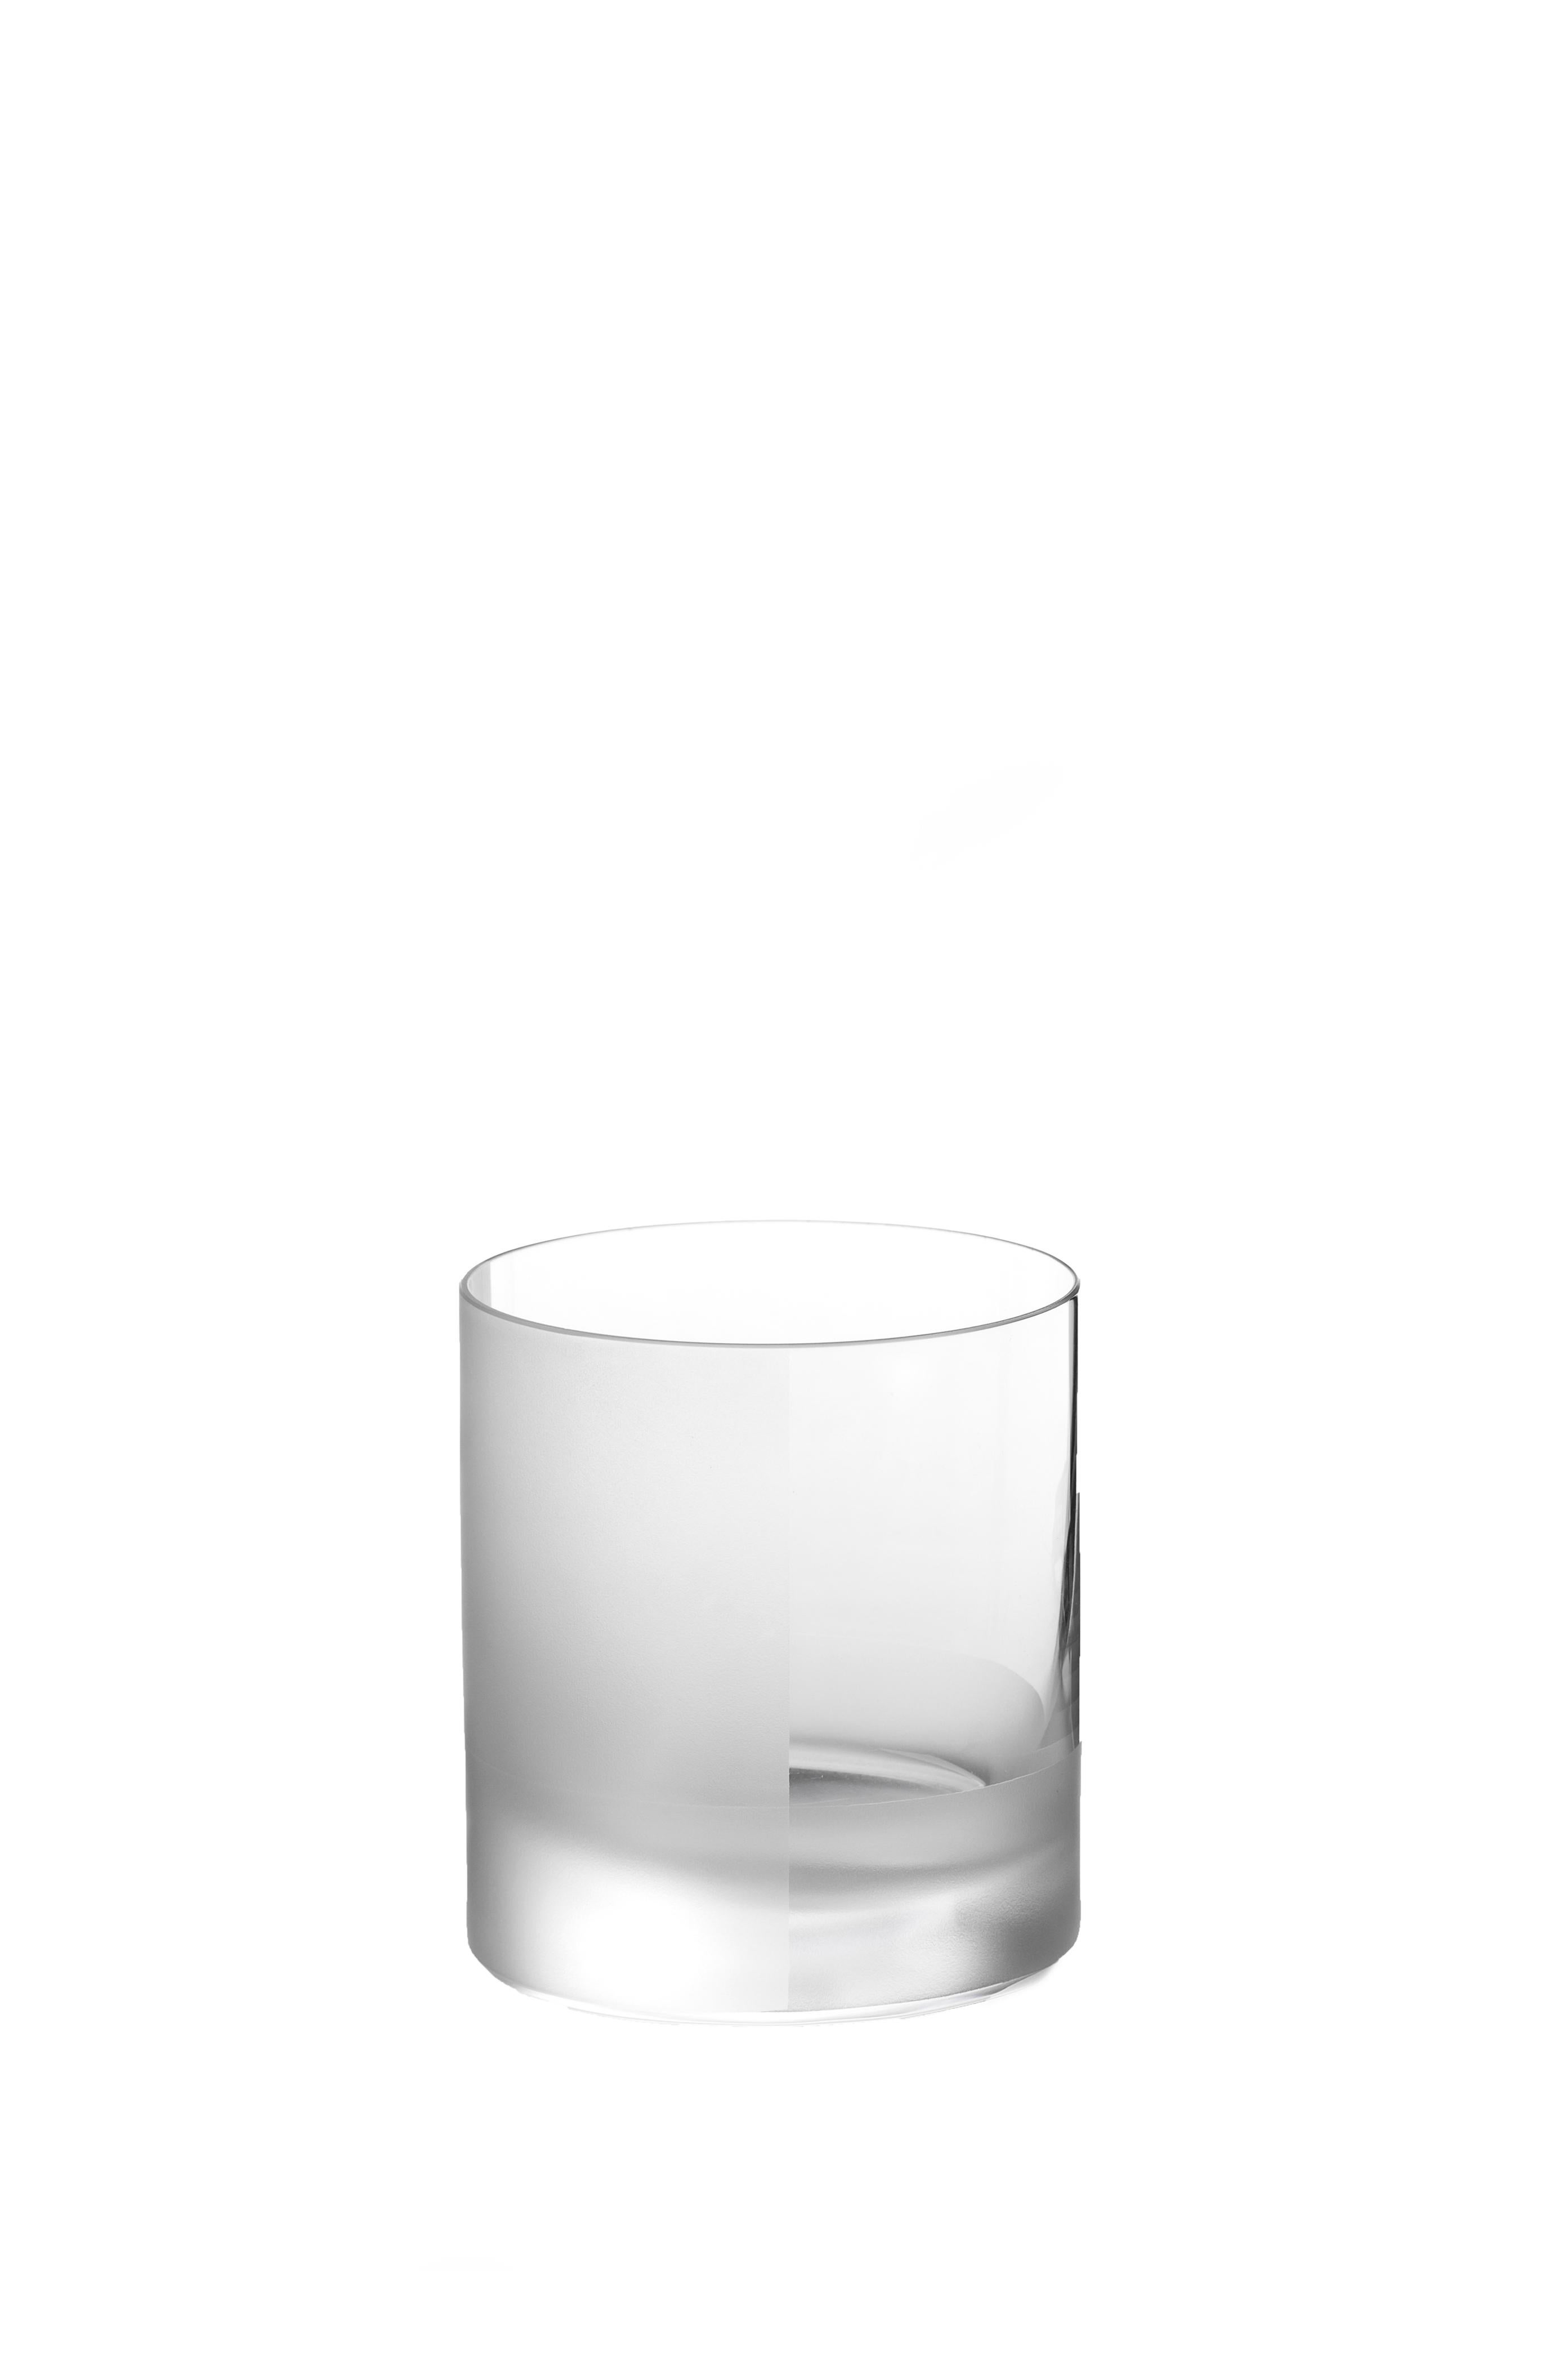 Hand-Crafted Scholten & Baijings Handmade Irish Crystal Whiskey Glass 'Elements' Series For Sale